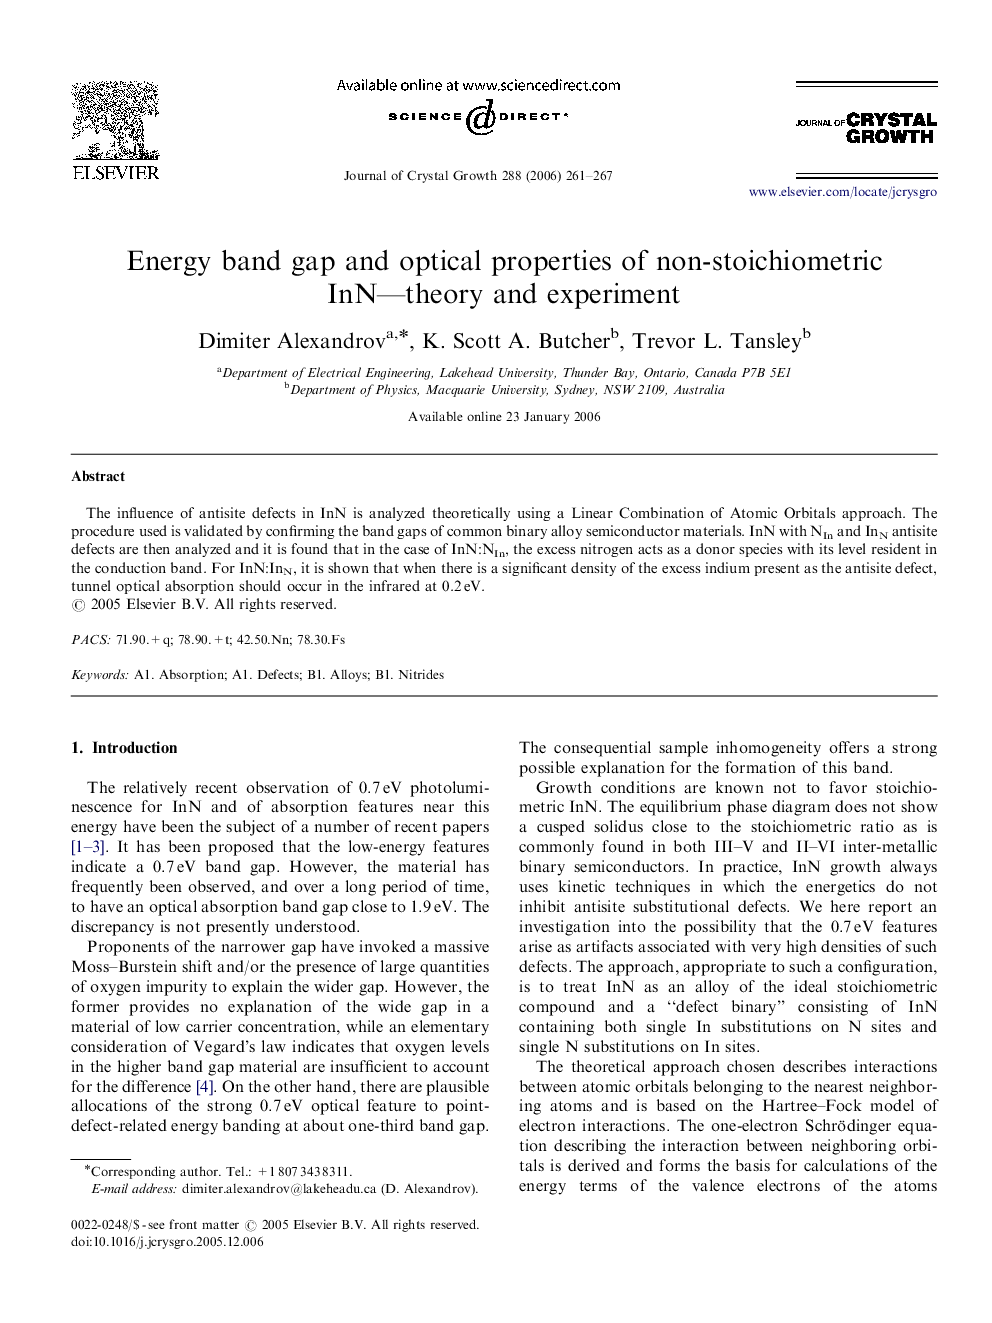 Energy band gap and optical properties of non-stoichiometric InN-theory and experiment